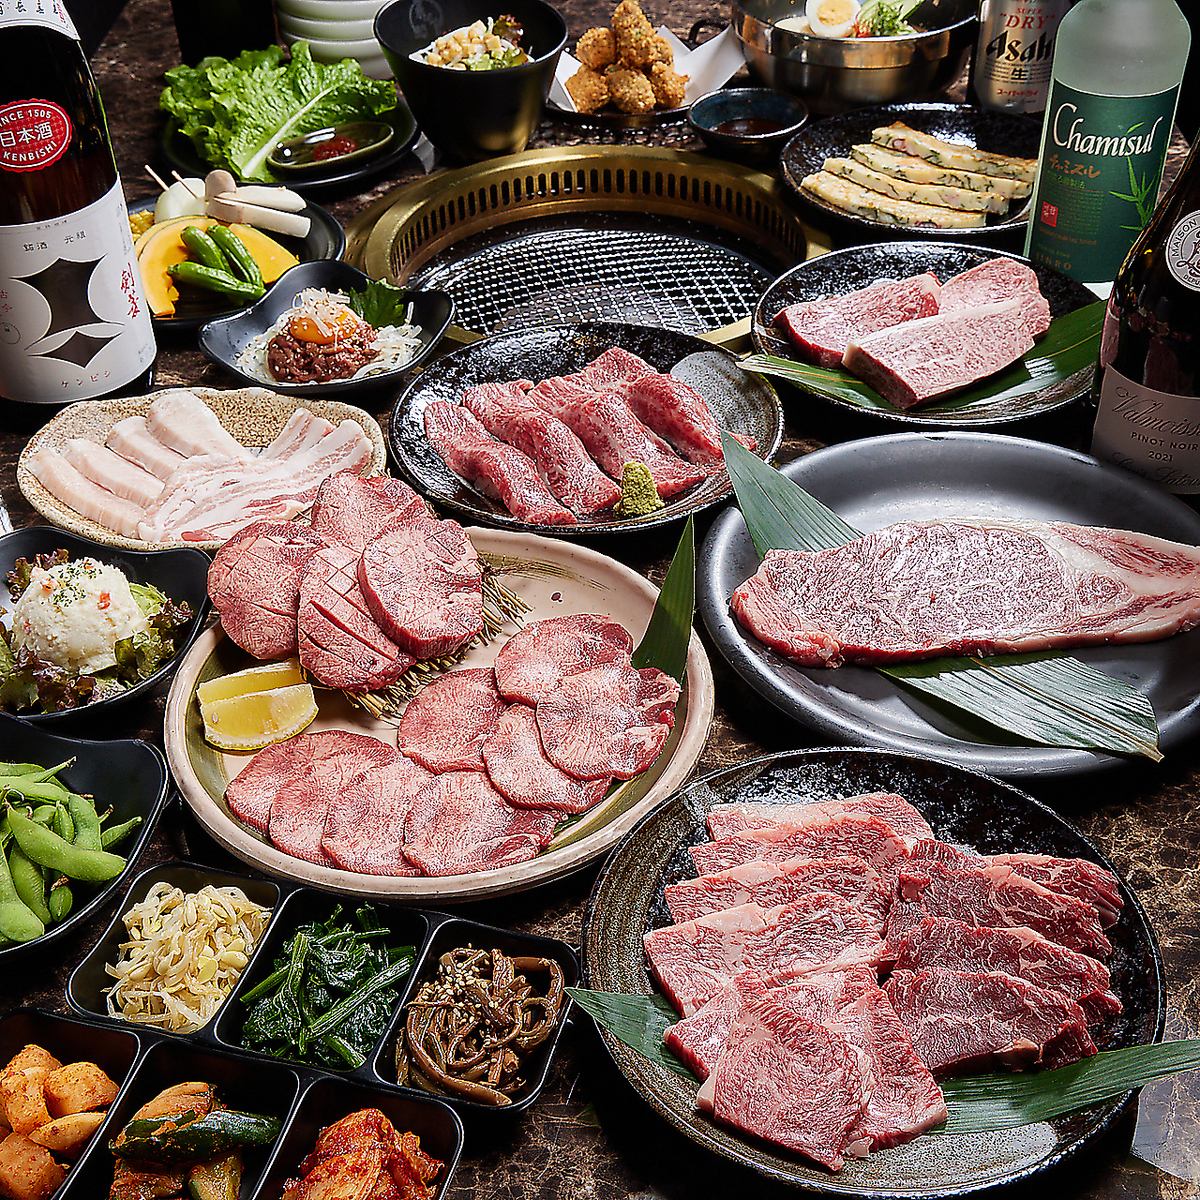 All-you-can-eat and drink A5 rank carefully selected Wagyu beef?!